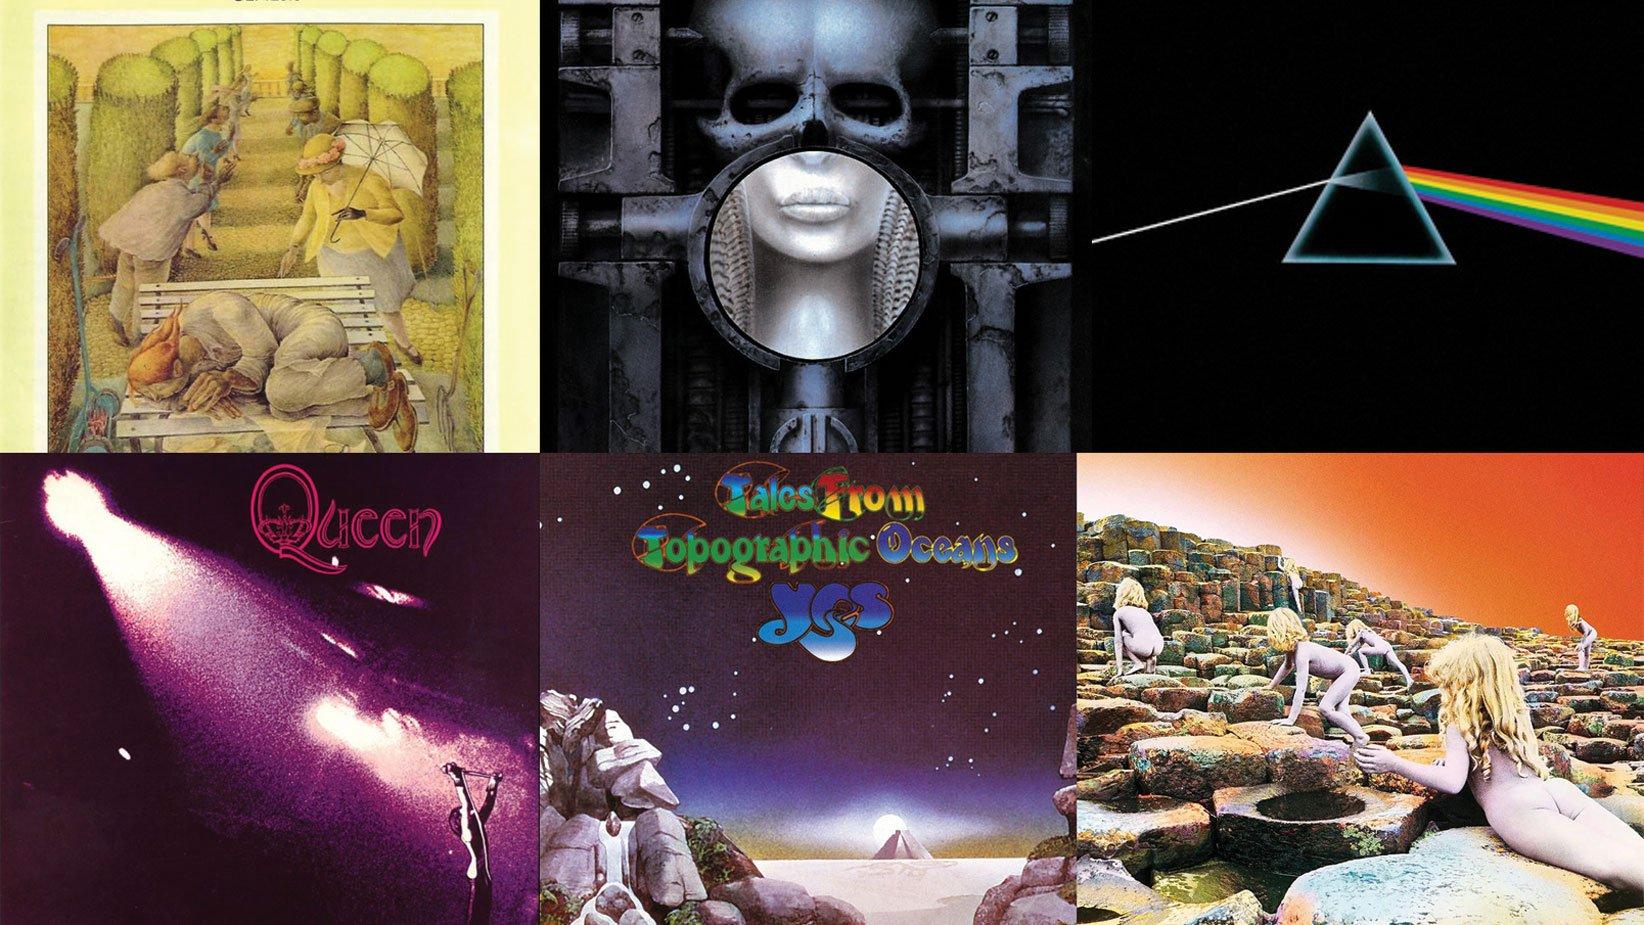 Album covers (L to R): Genesis – Selling England by the Pound; Emerson, Lake & Palmer - Brain Salad Surgery; Pink Floyd – The Dark Side of the Moon; Queen - Queen I; Yes -Tales from Topographic Oceans; Led Zeppelin - Houses of the Holy